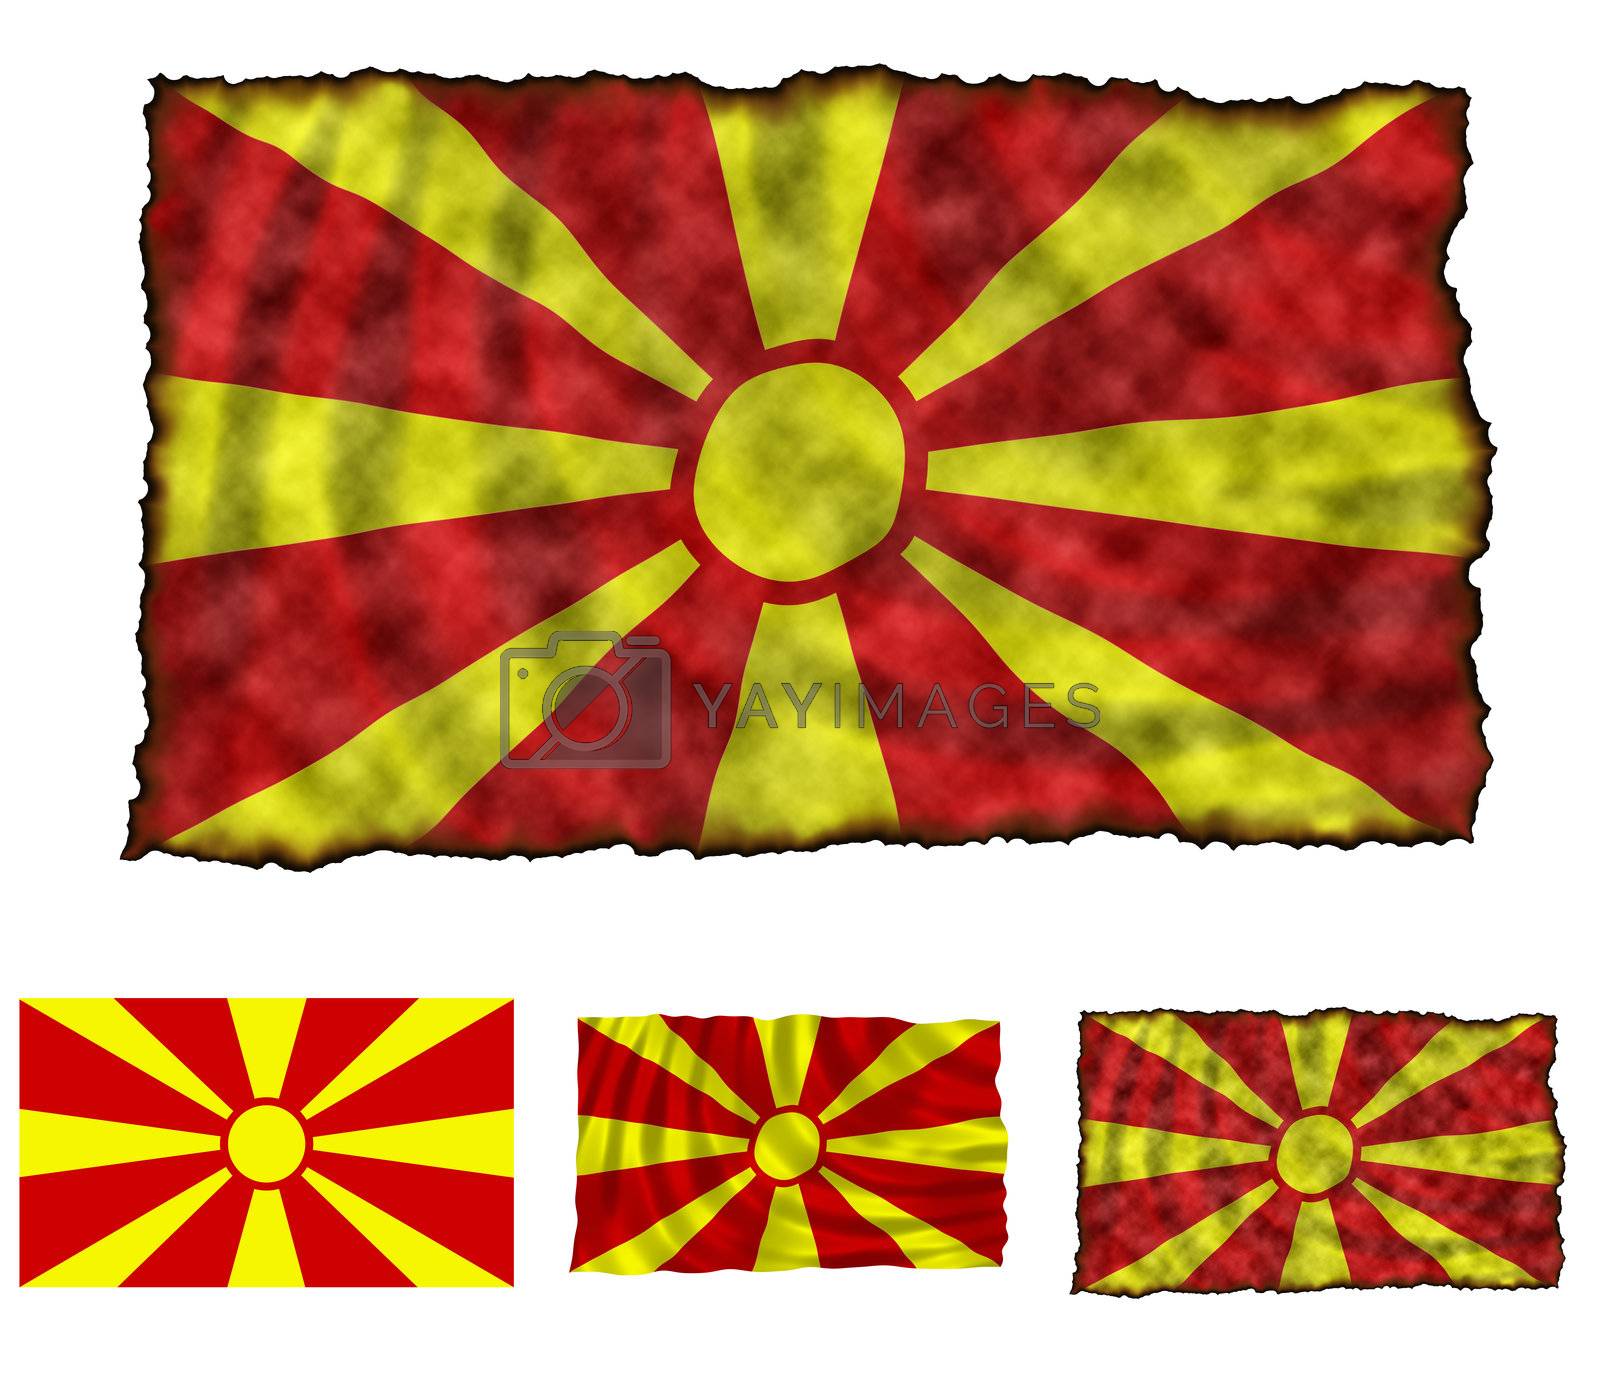 Royalty free image of Flag of Macedonia by SNR